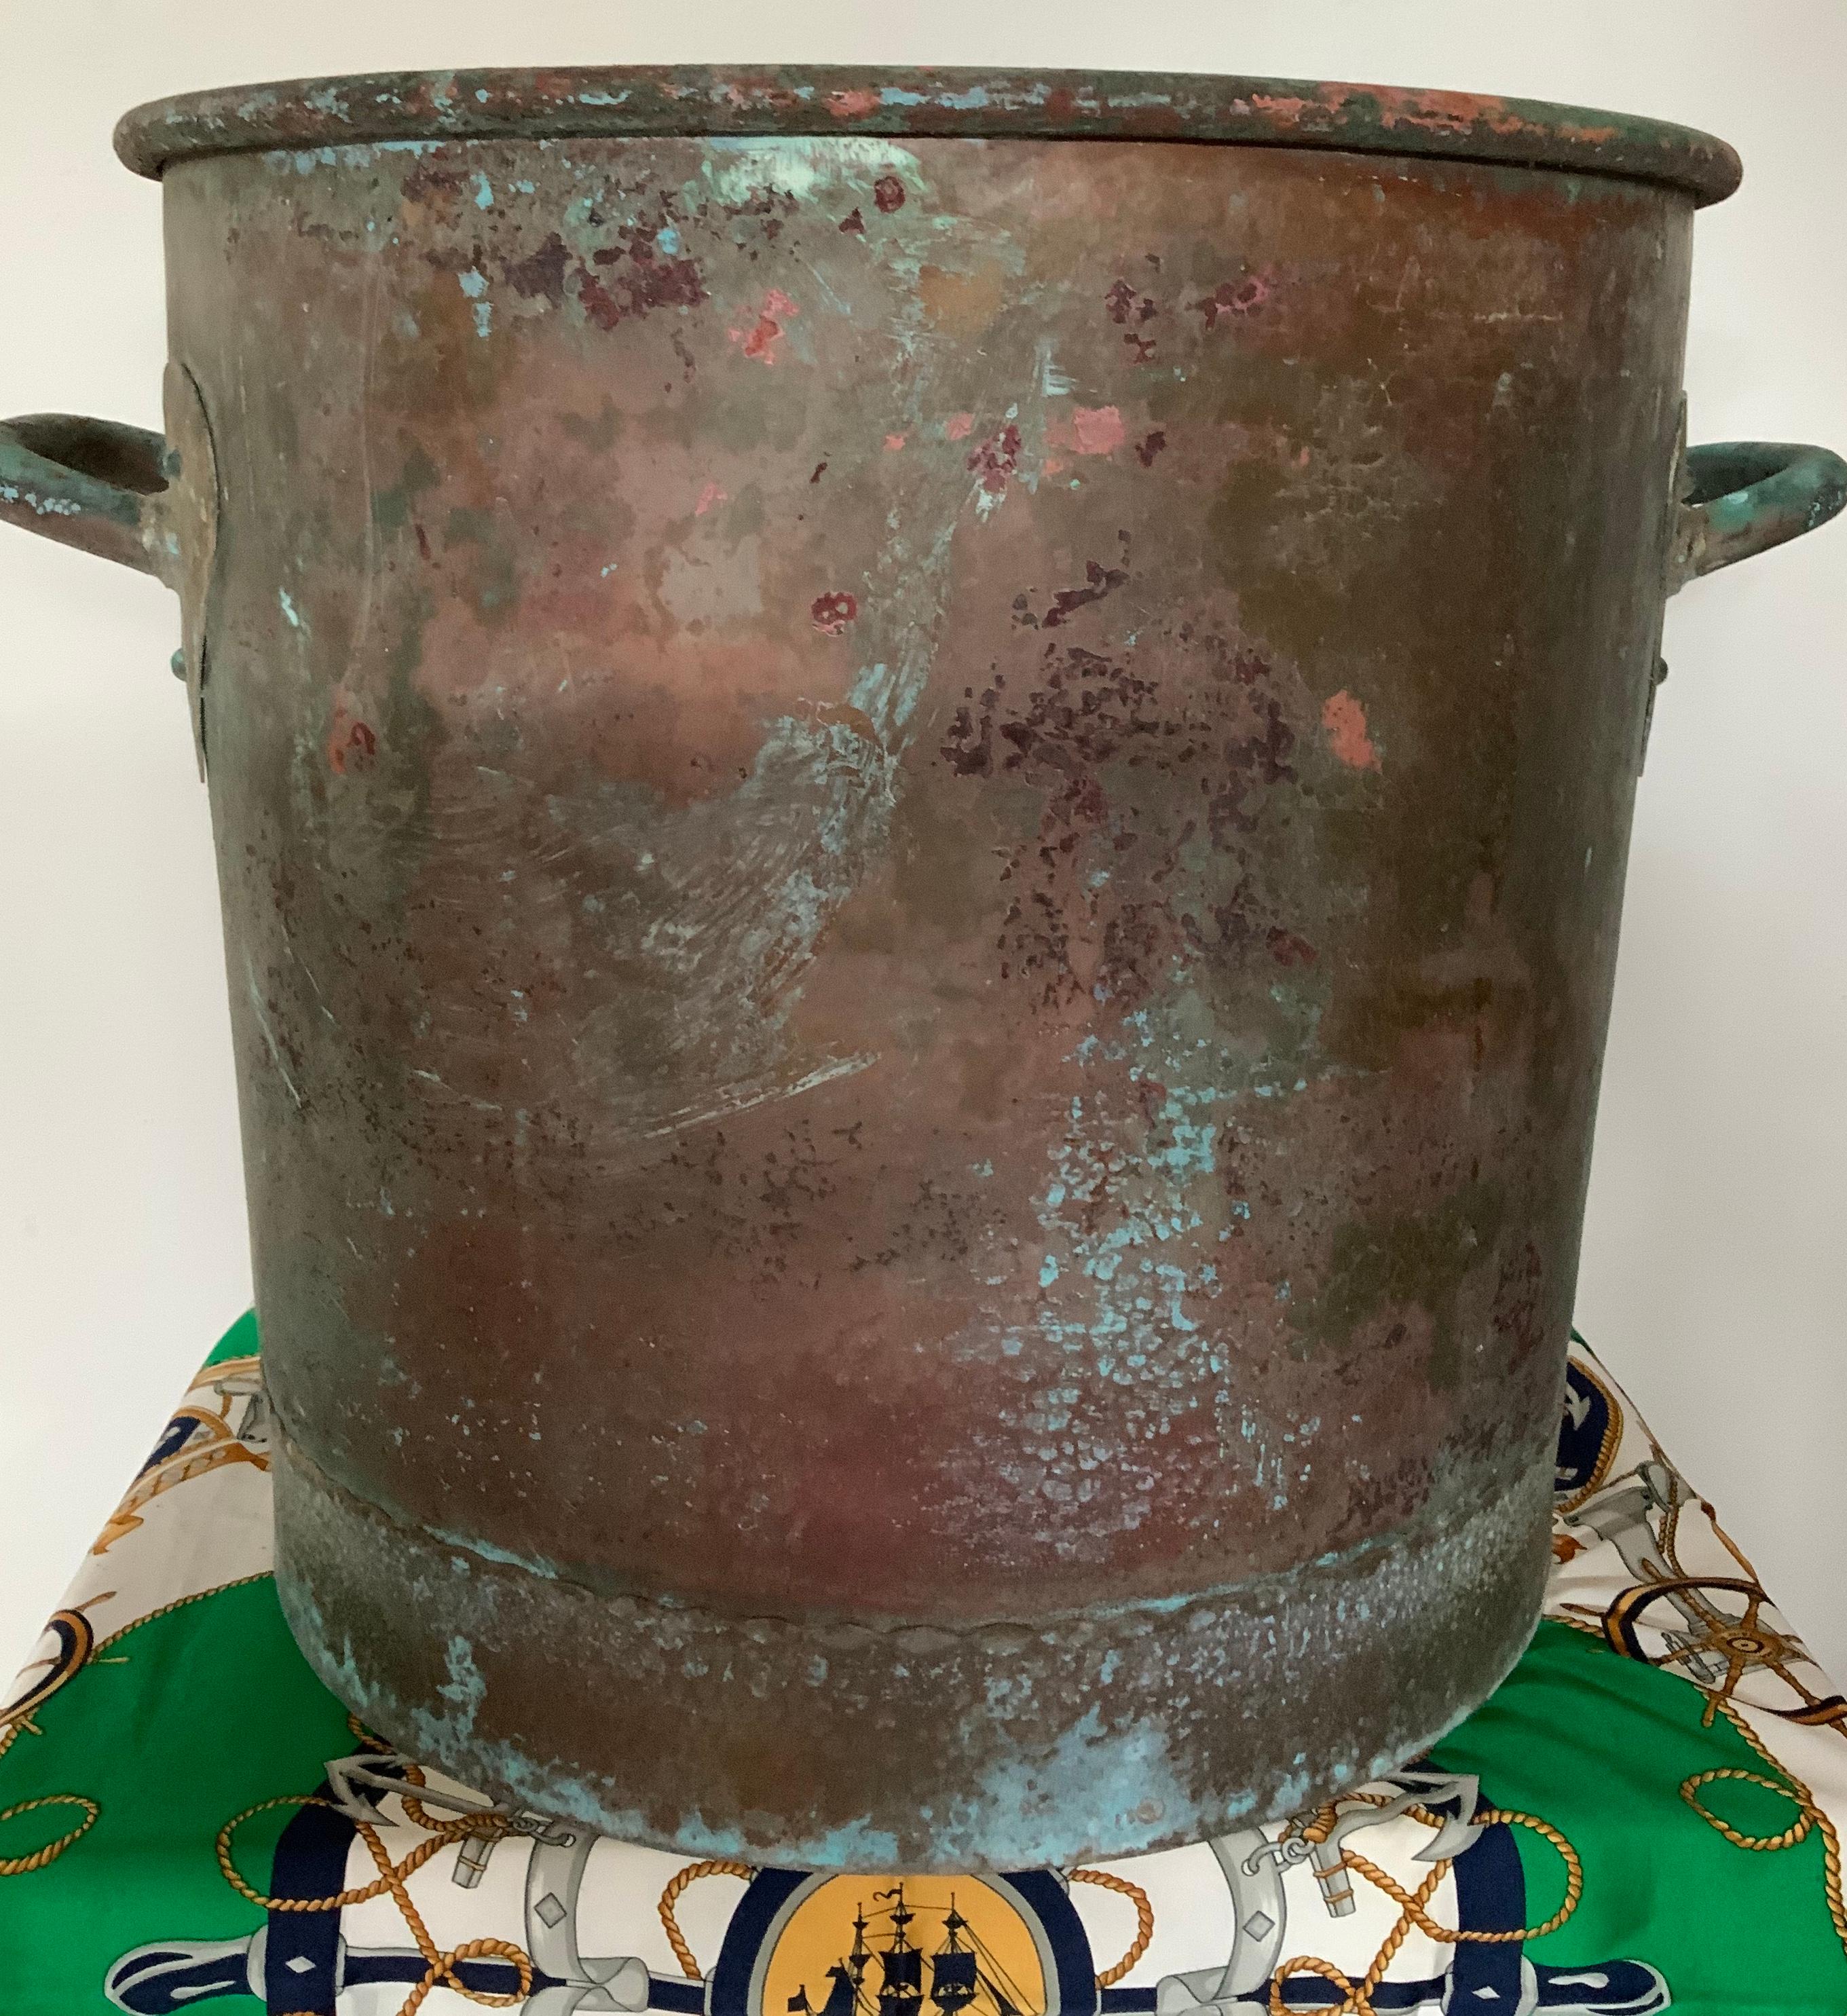 Huge, round, and heavy copper cauldron with two heart shaped brackets holding handle rings. Highlighted by his natural patina of years of use. The lower bottom is embellished with scalloped border decor.